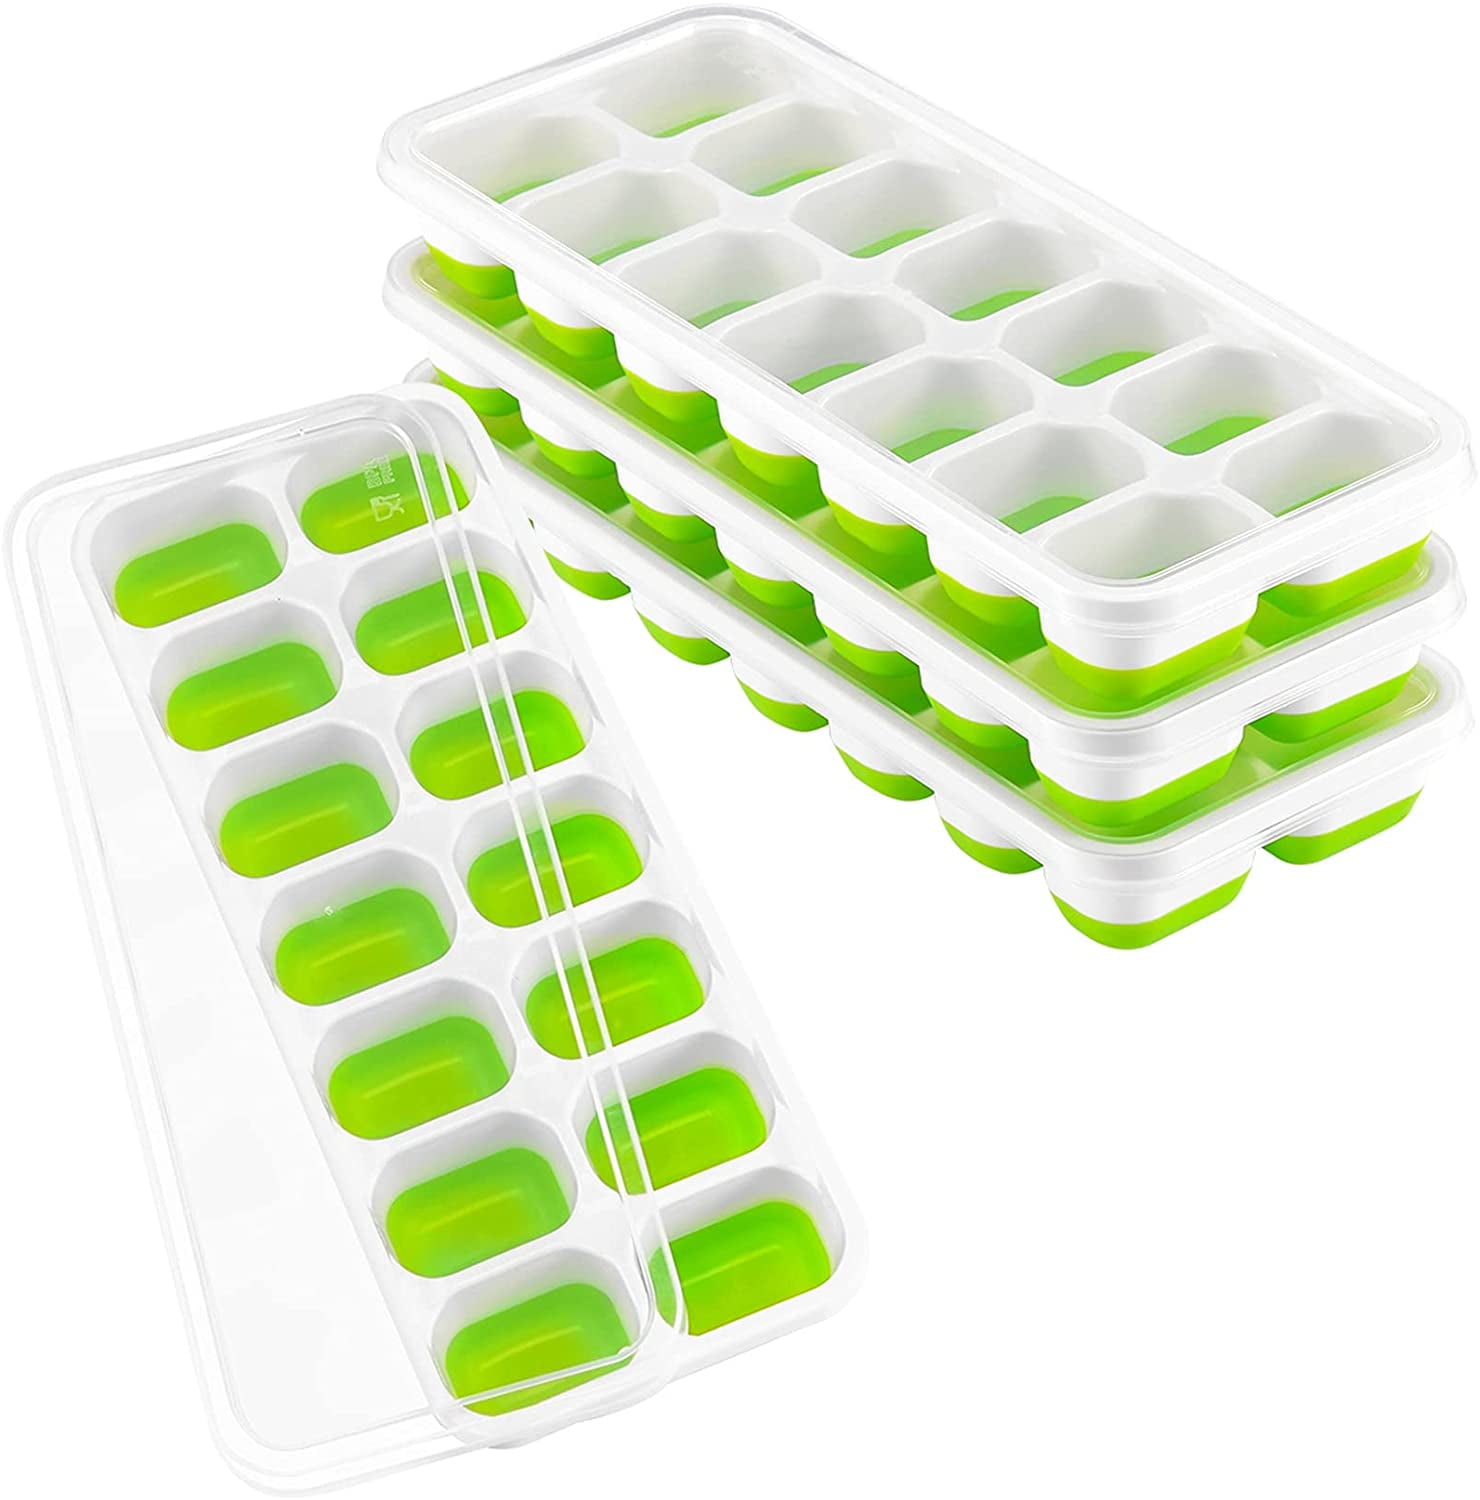 3 Packs Ice Cube Trays Silicone Ice Cube Trays with Lids Easy Release Ice Trays Set Make 45 Large Ice Cube Flexible Ice Cube Mold with Ice Tongs 